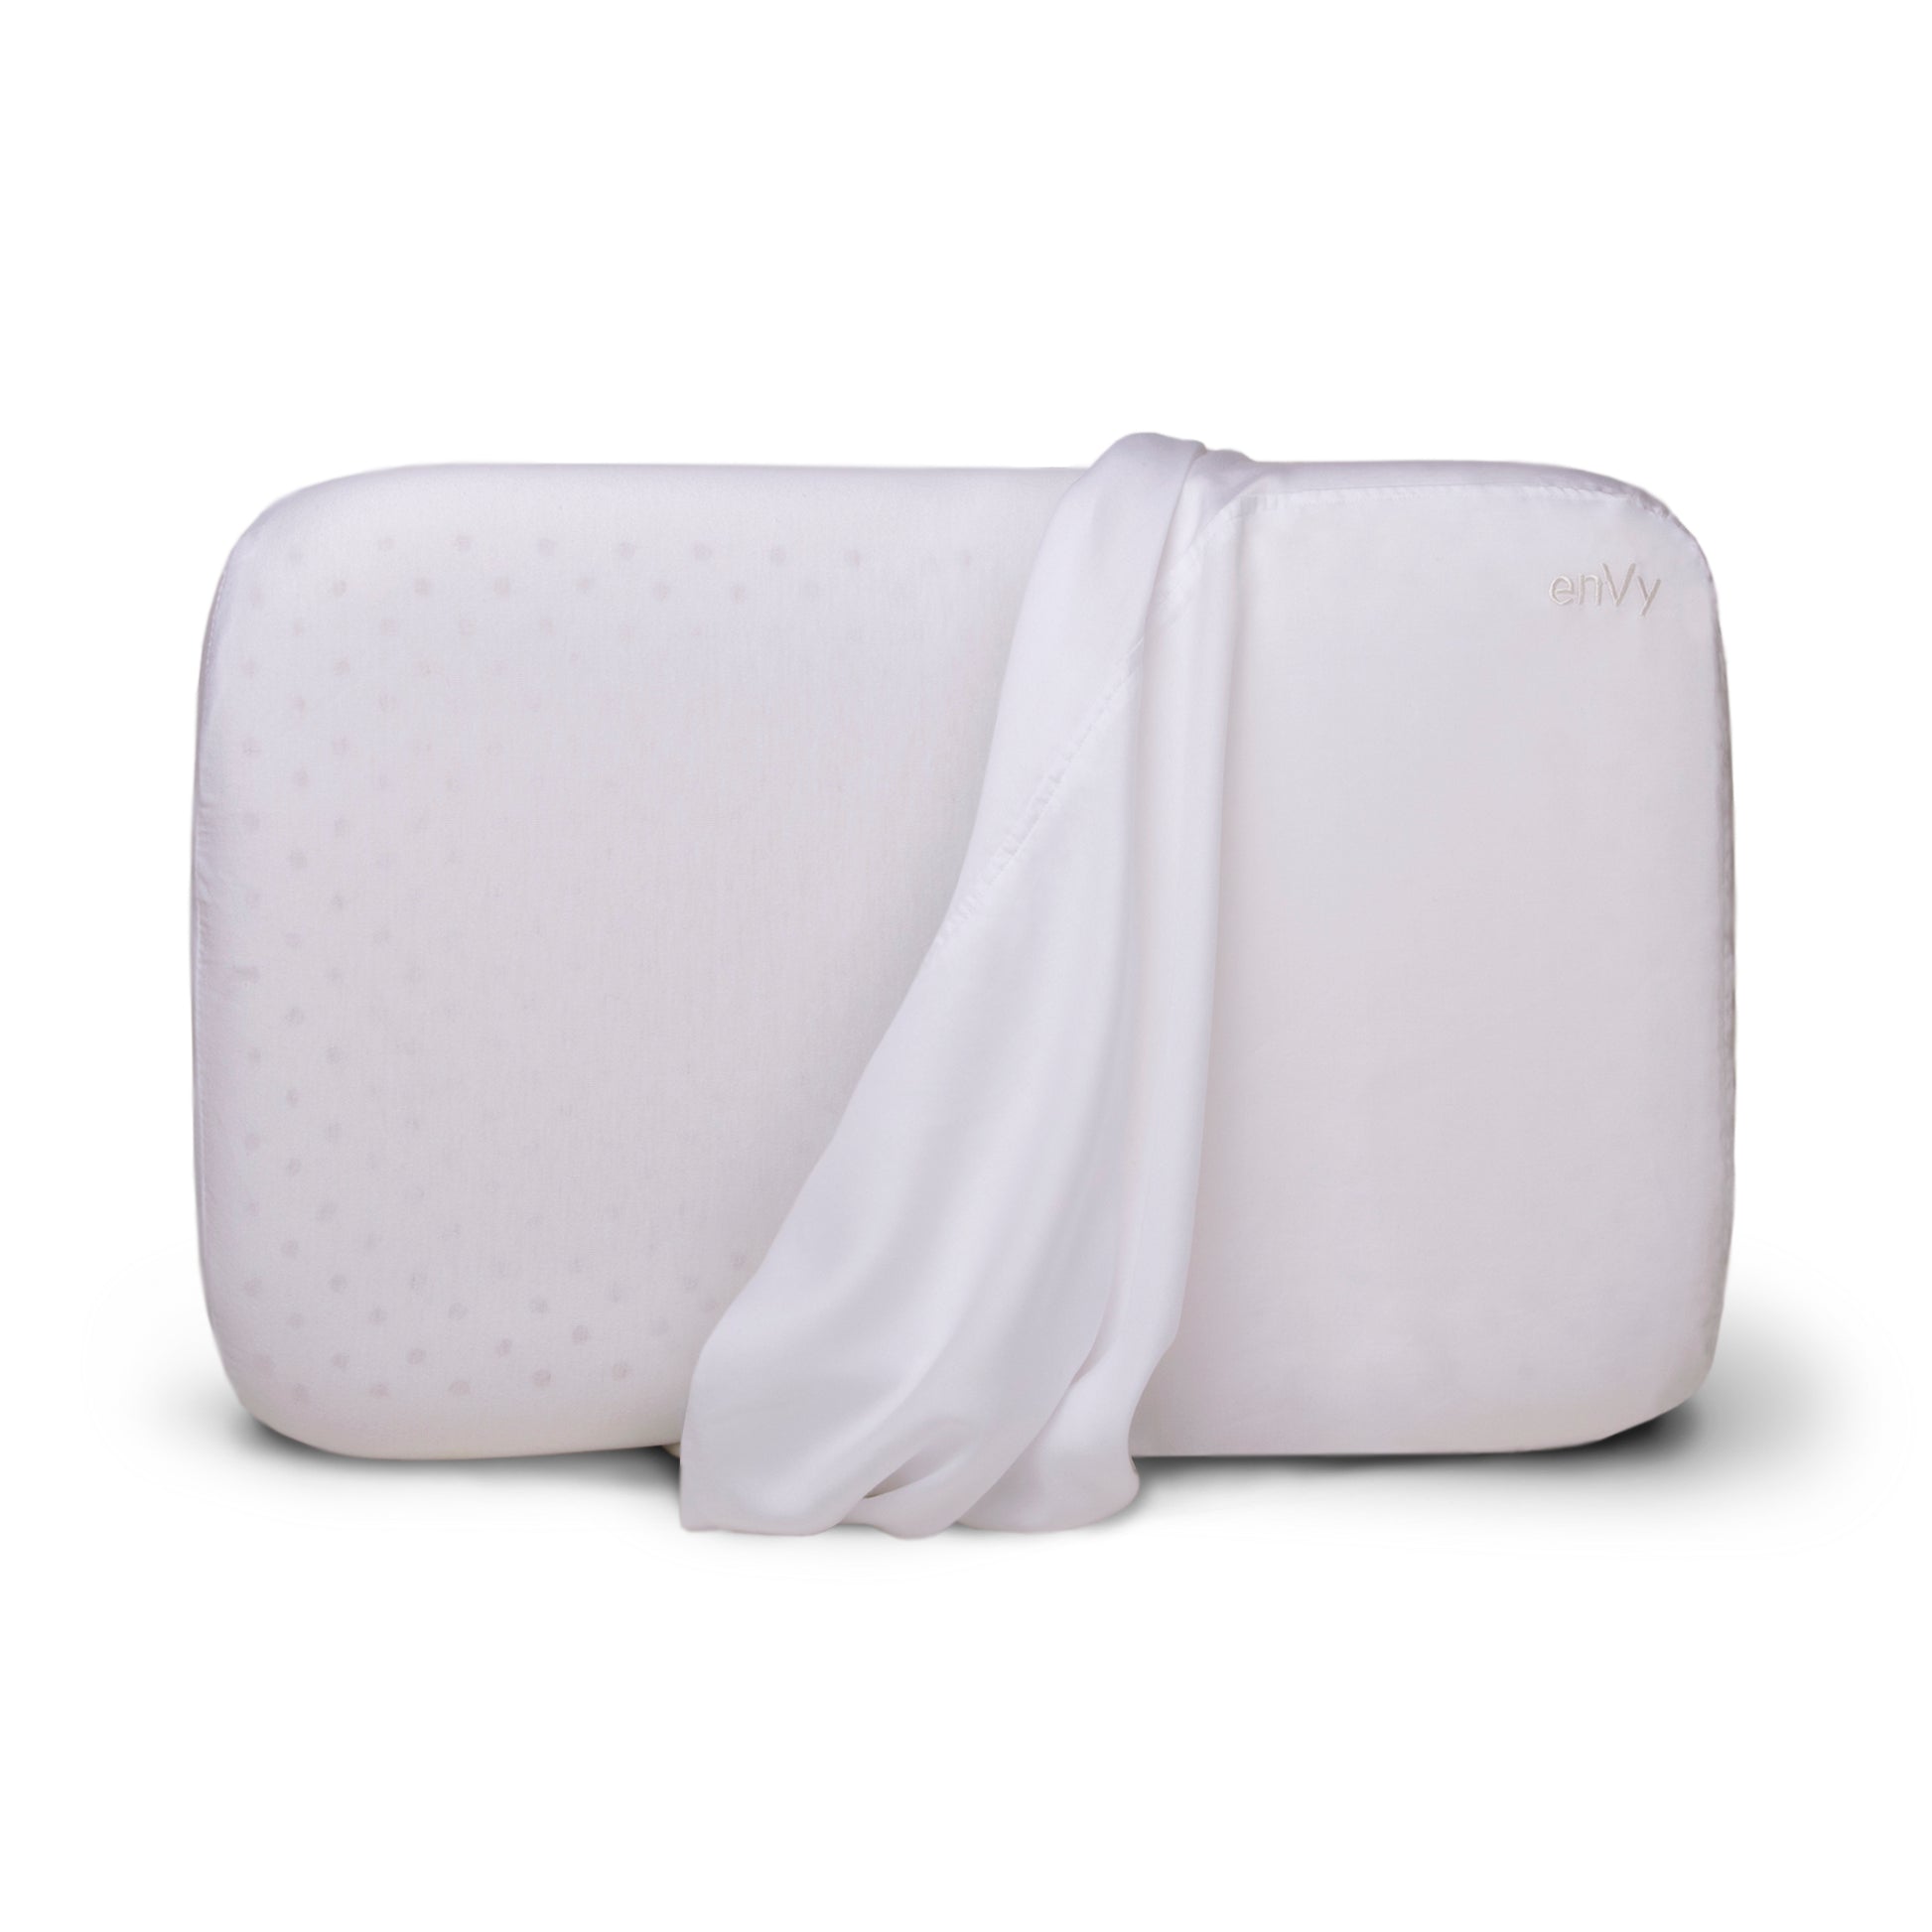 Natural Latex Anti-Aging Pillow with TENCEL™ pillowcase by enVy